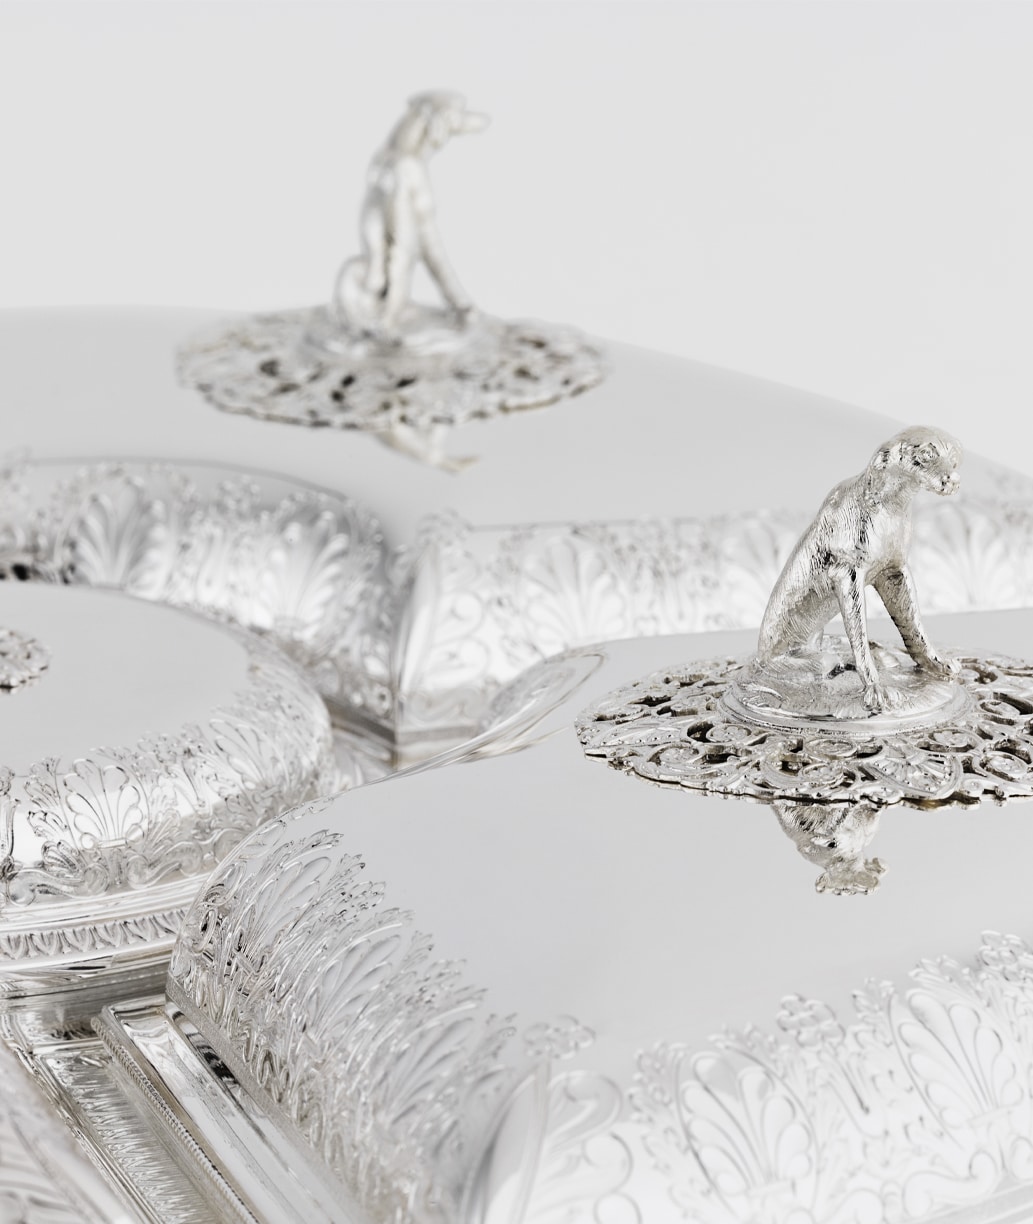 Serving plate in sterling silver designed by Martin-Guillaume Biennais